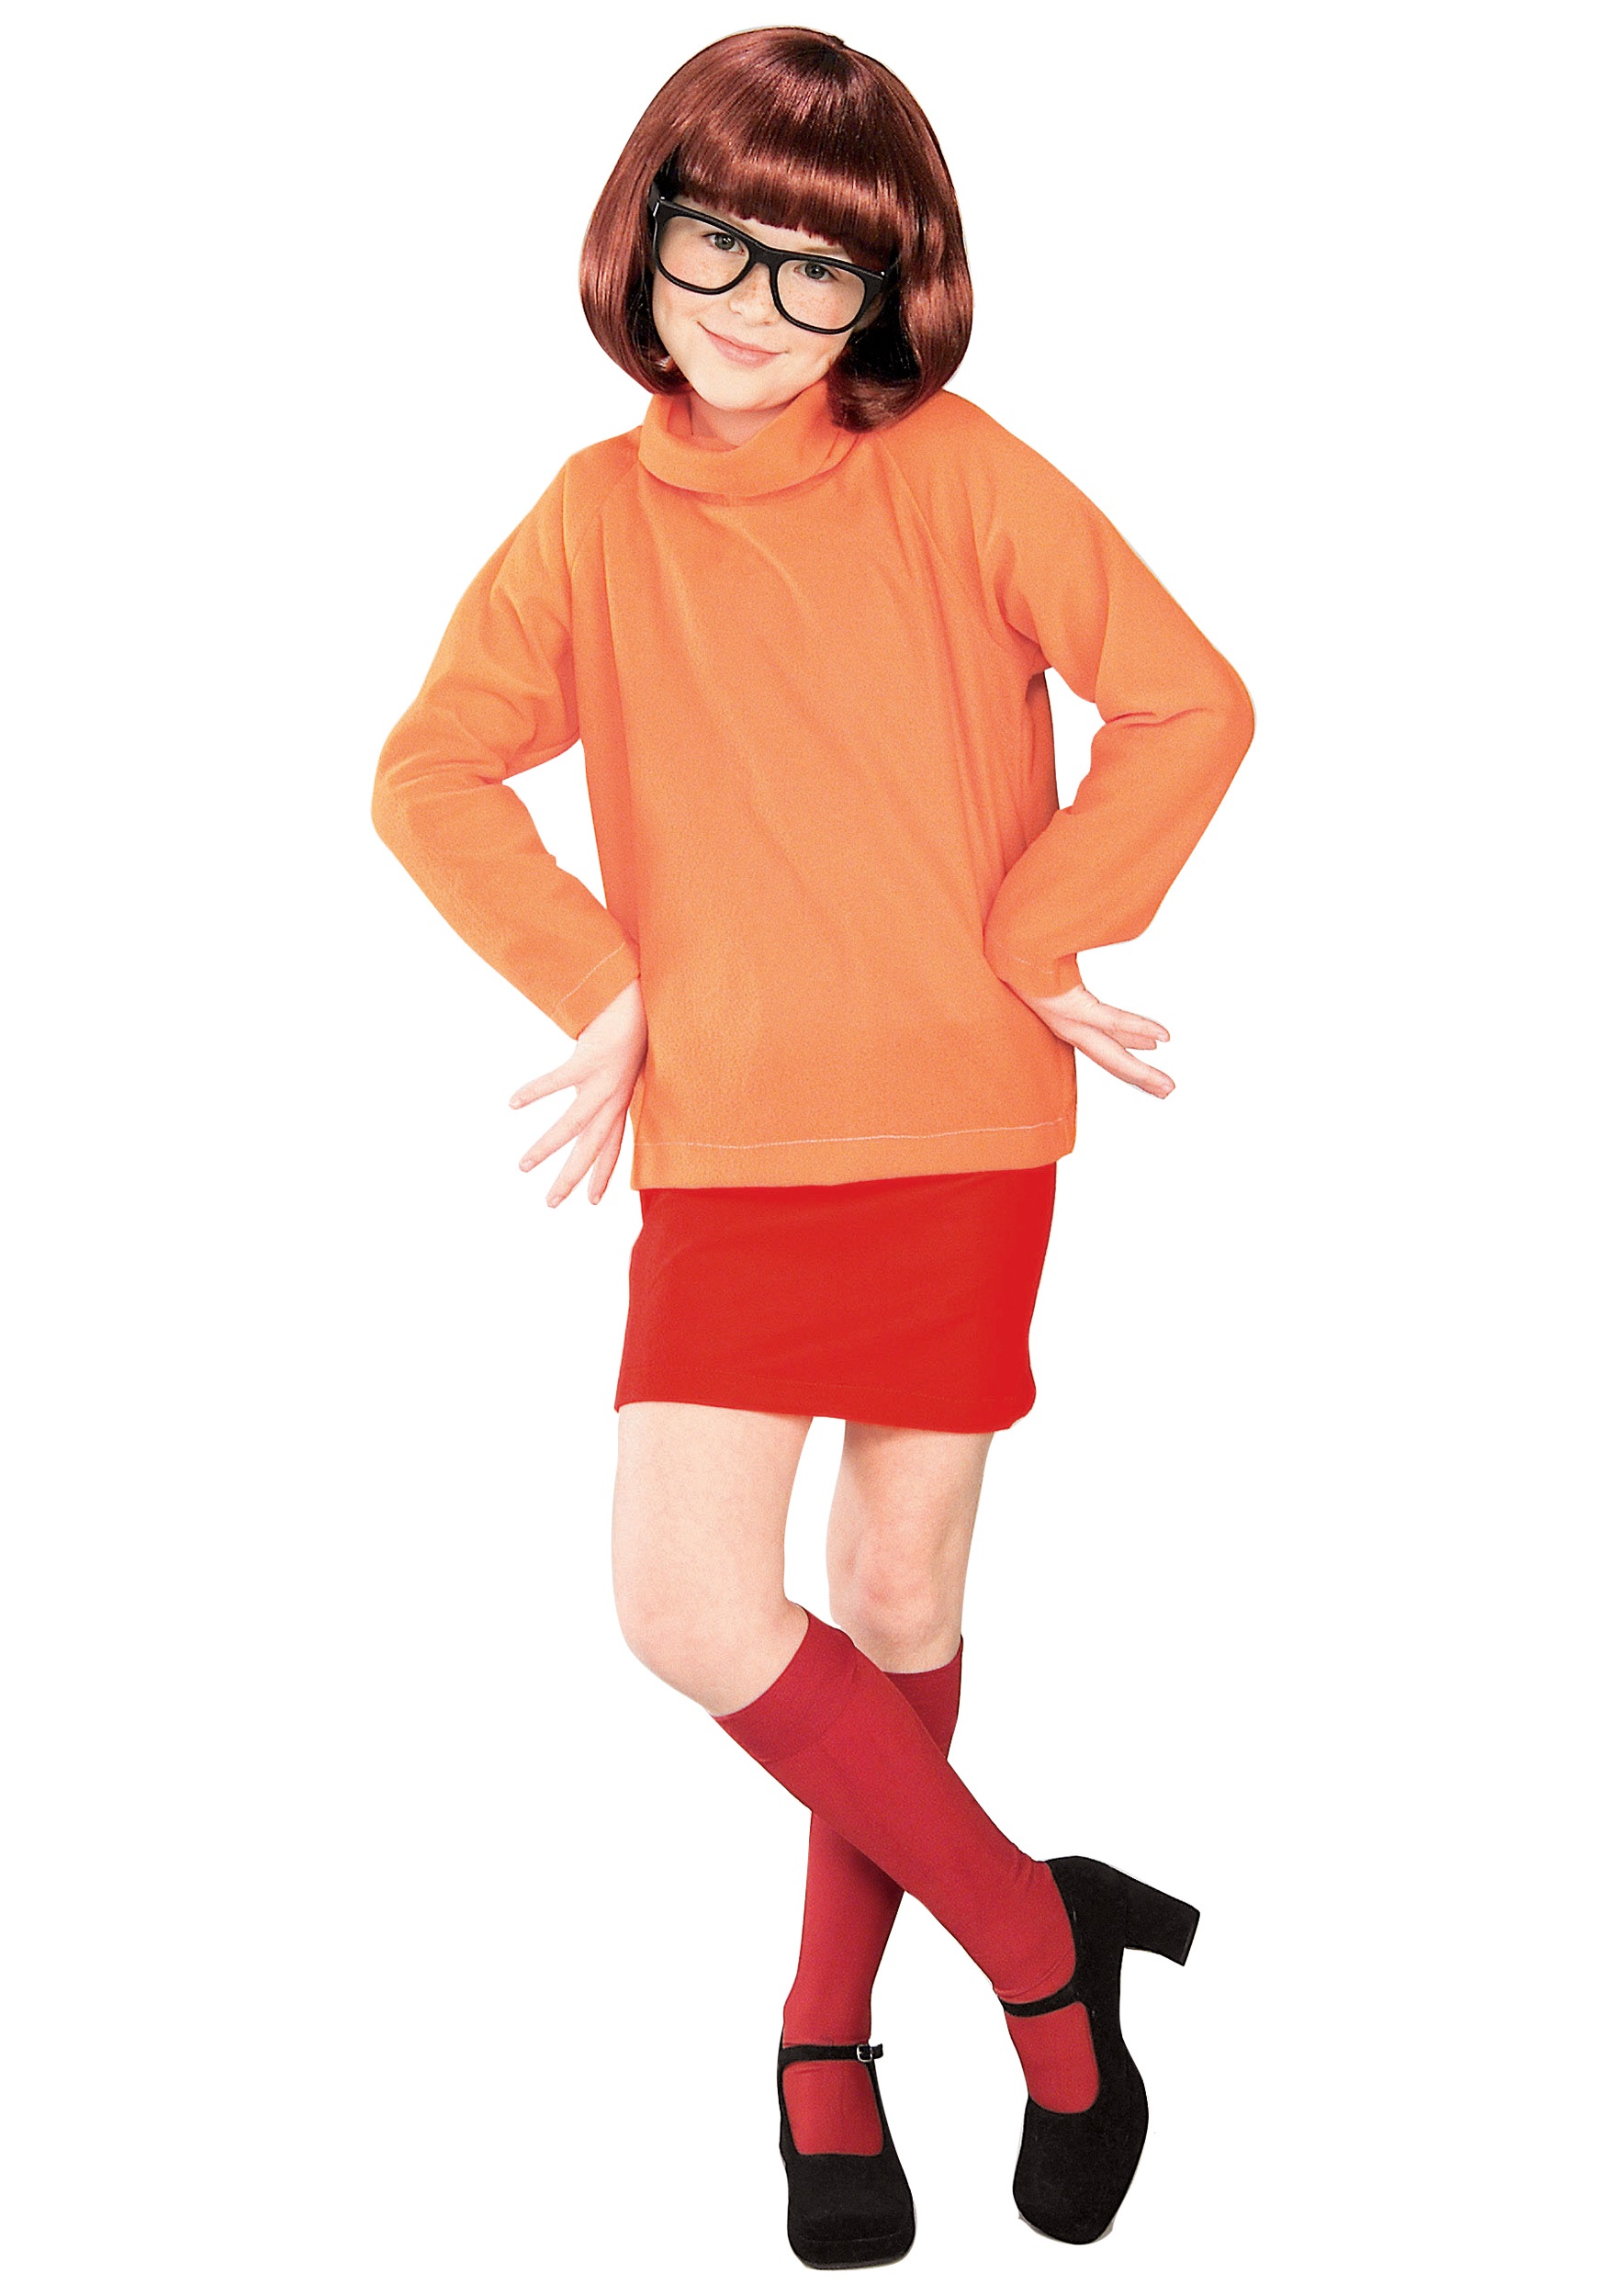 Our child Velma costume is a fun Scooby Doo Halloween costume for girls. 